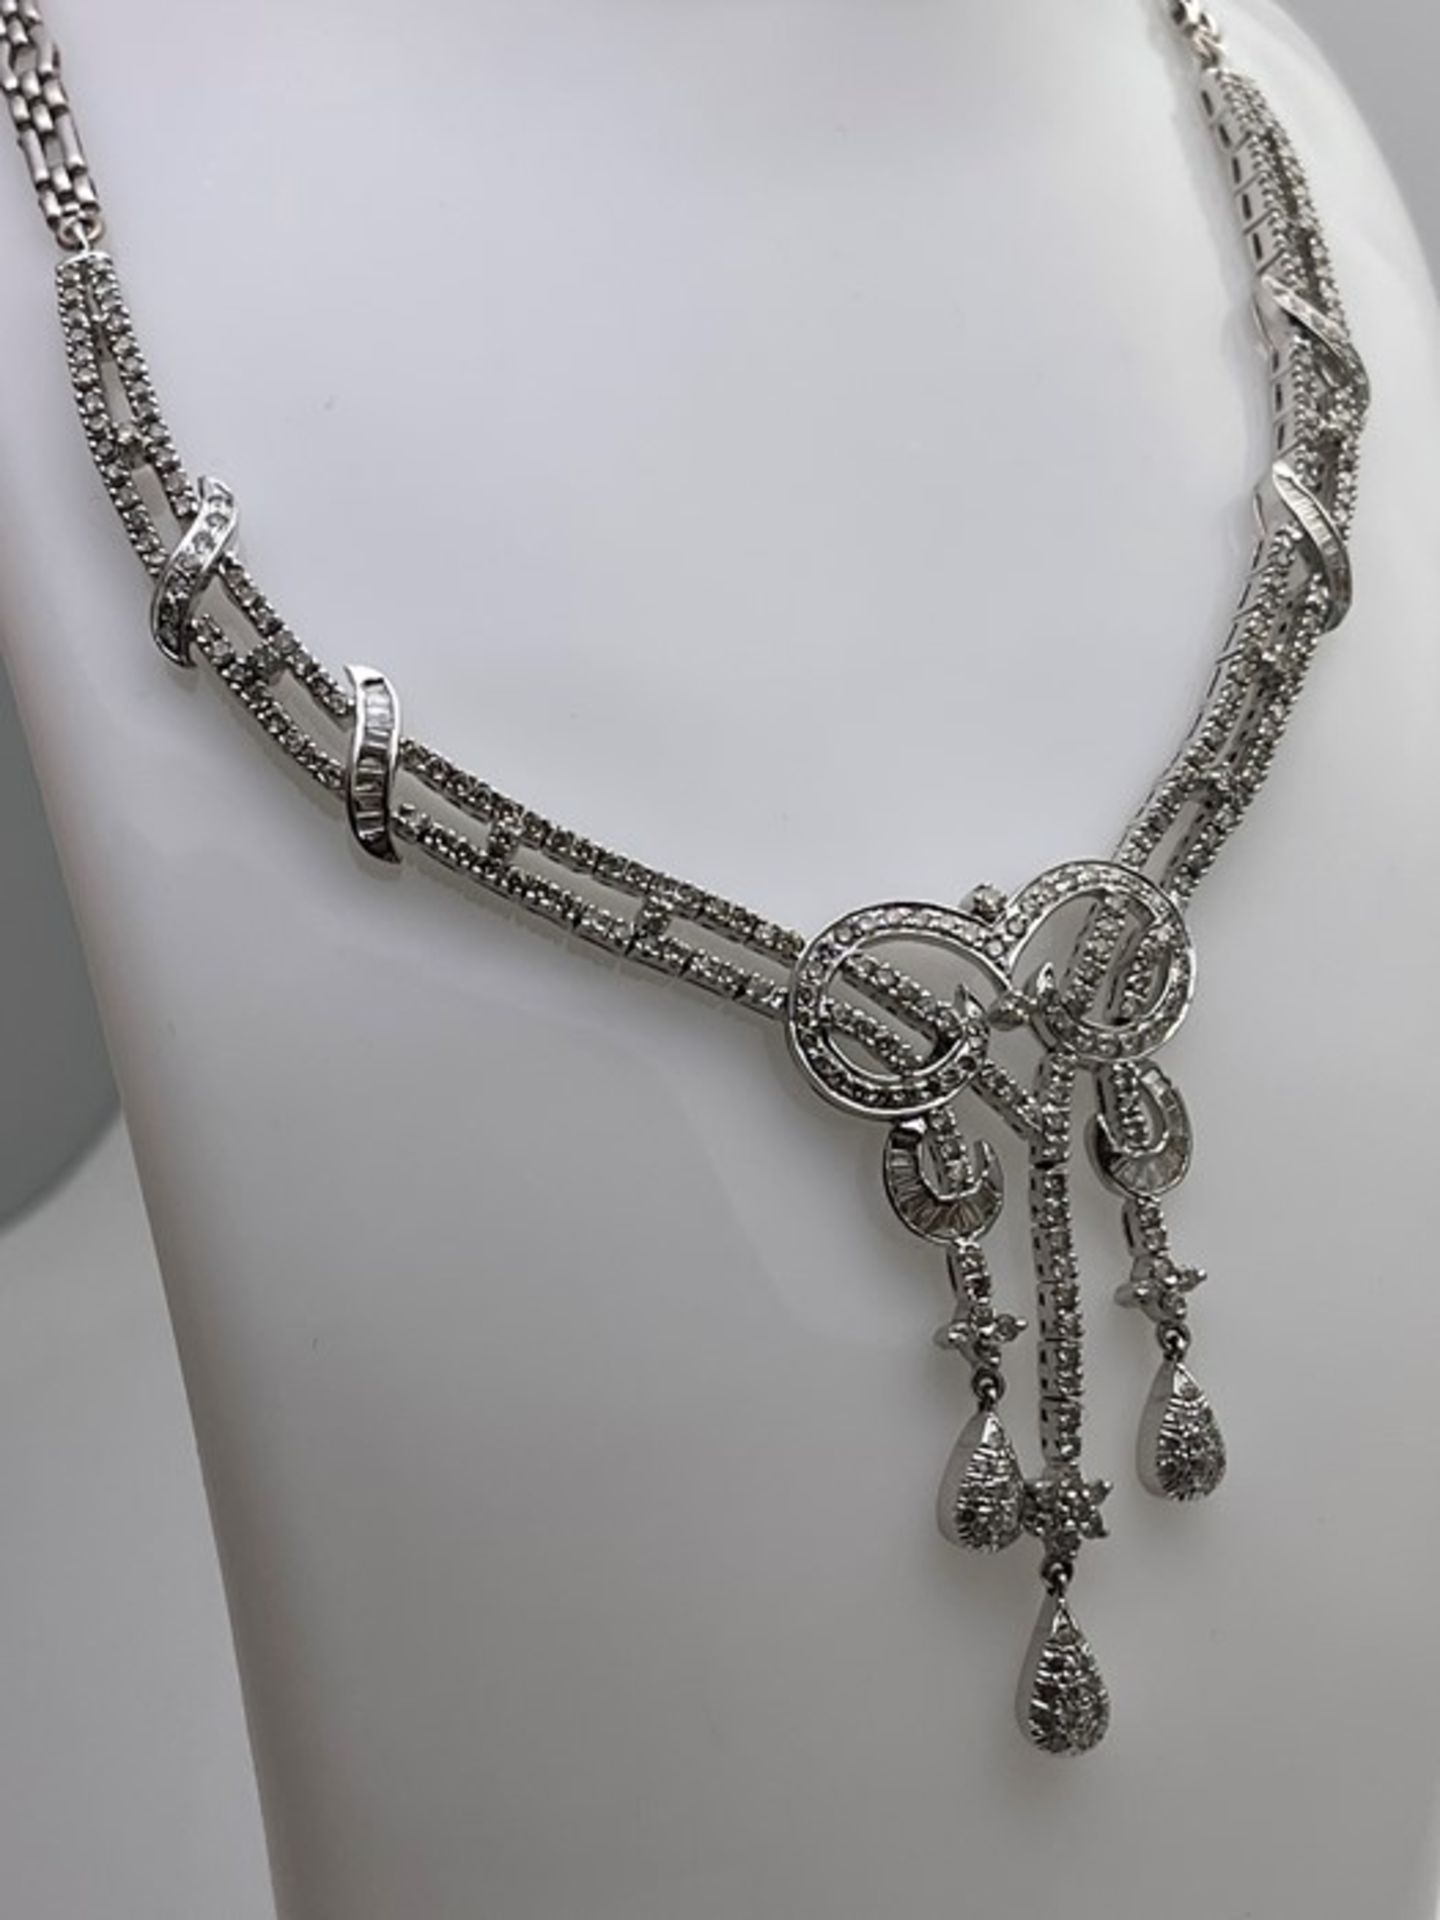 ***£19,375.00*** 14CT WHITE GOLD DIAMOND COLLARATE NECKLACE - Image 2 of 4